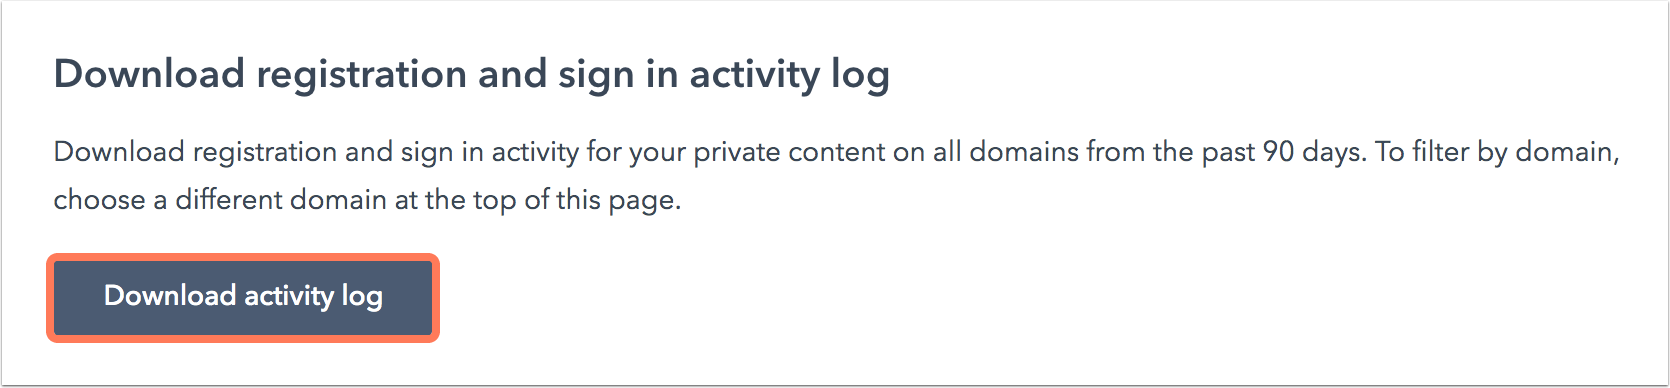 export-private-content-activity-log